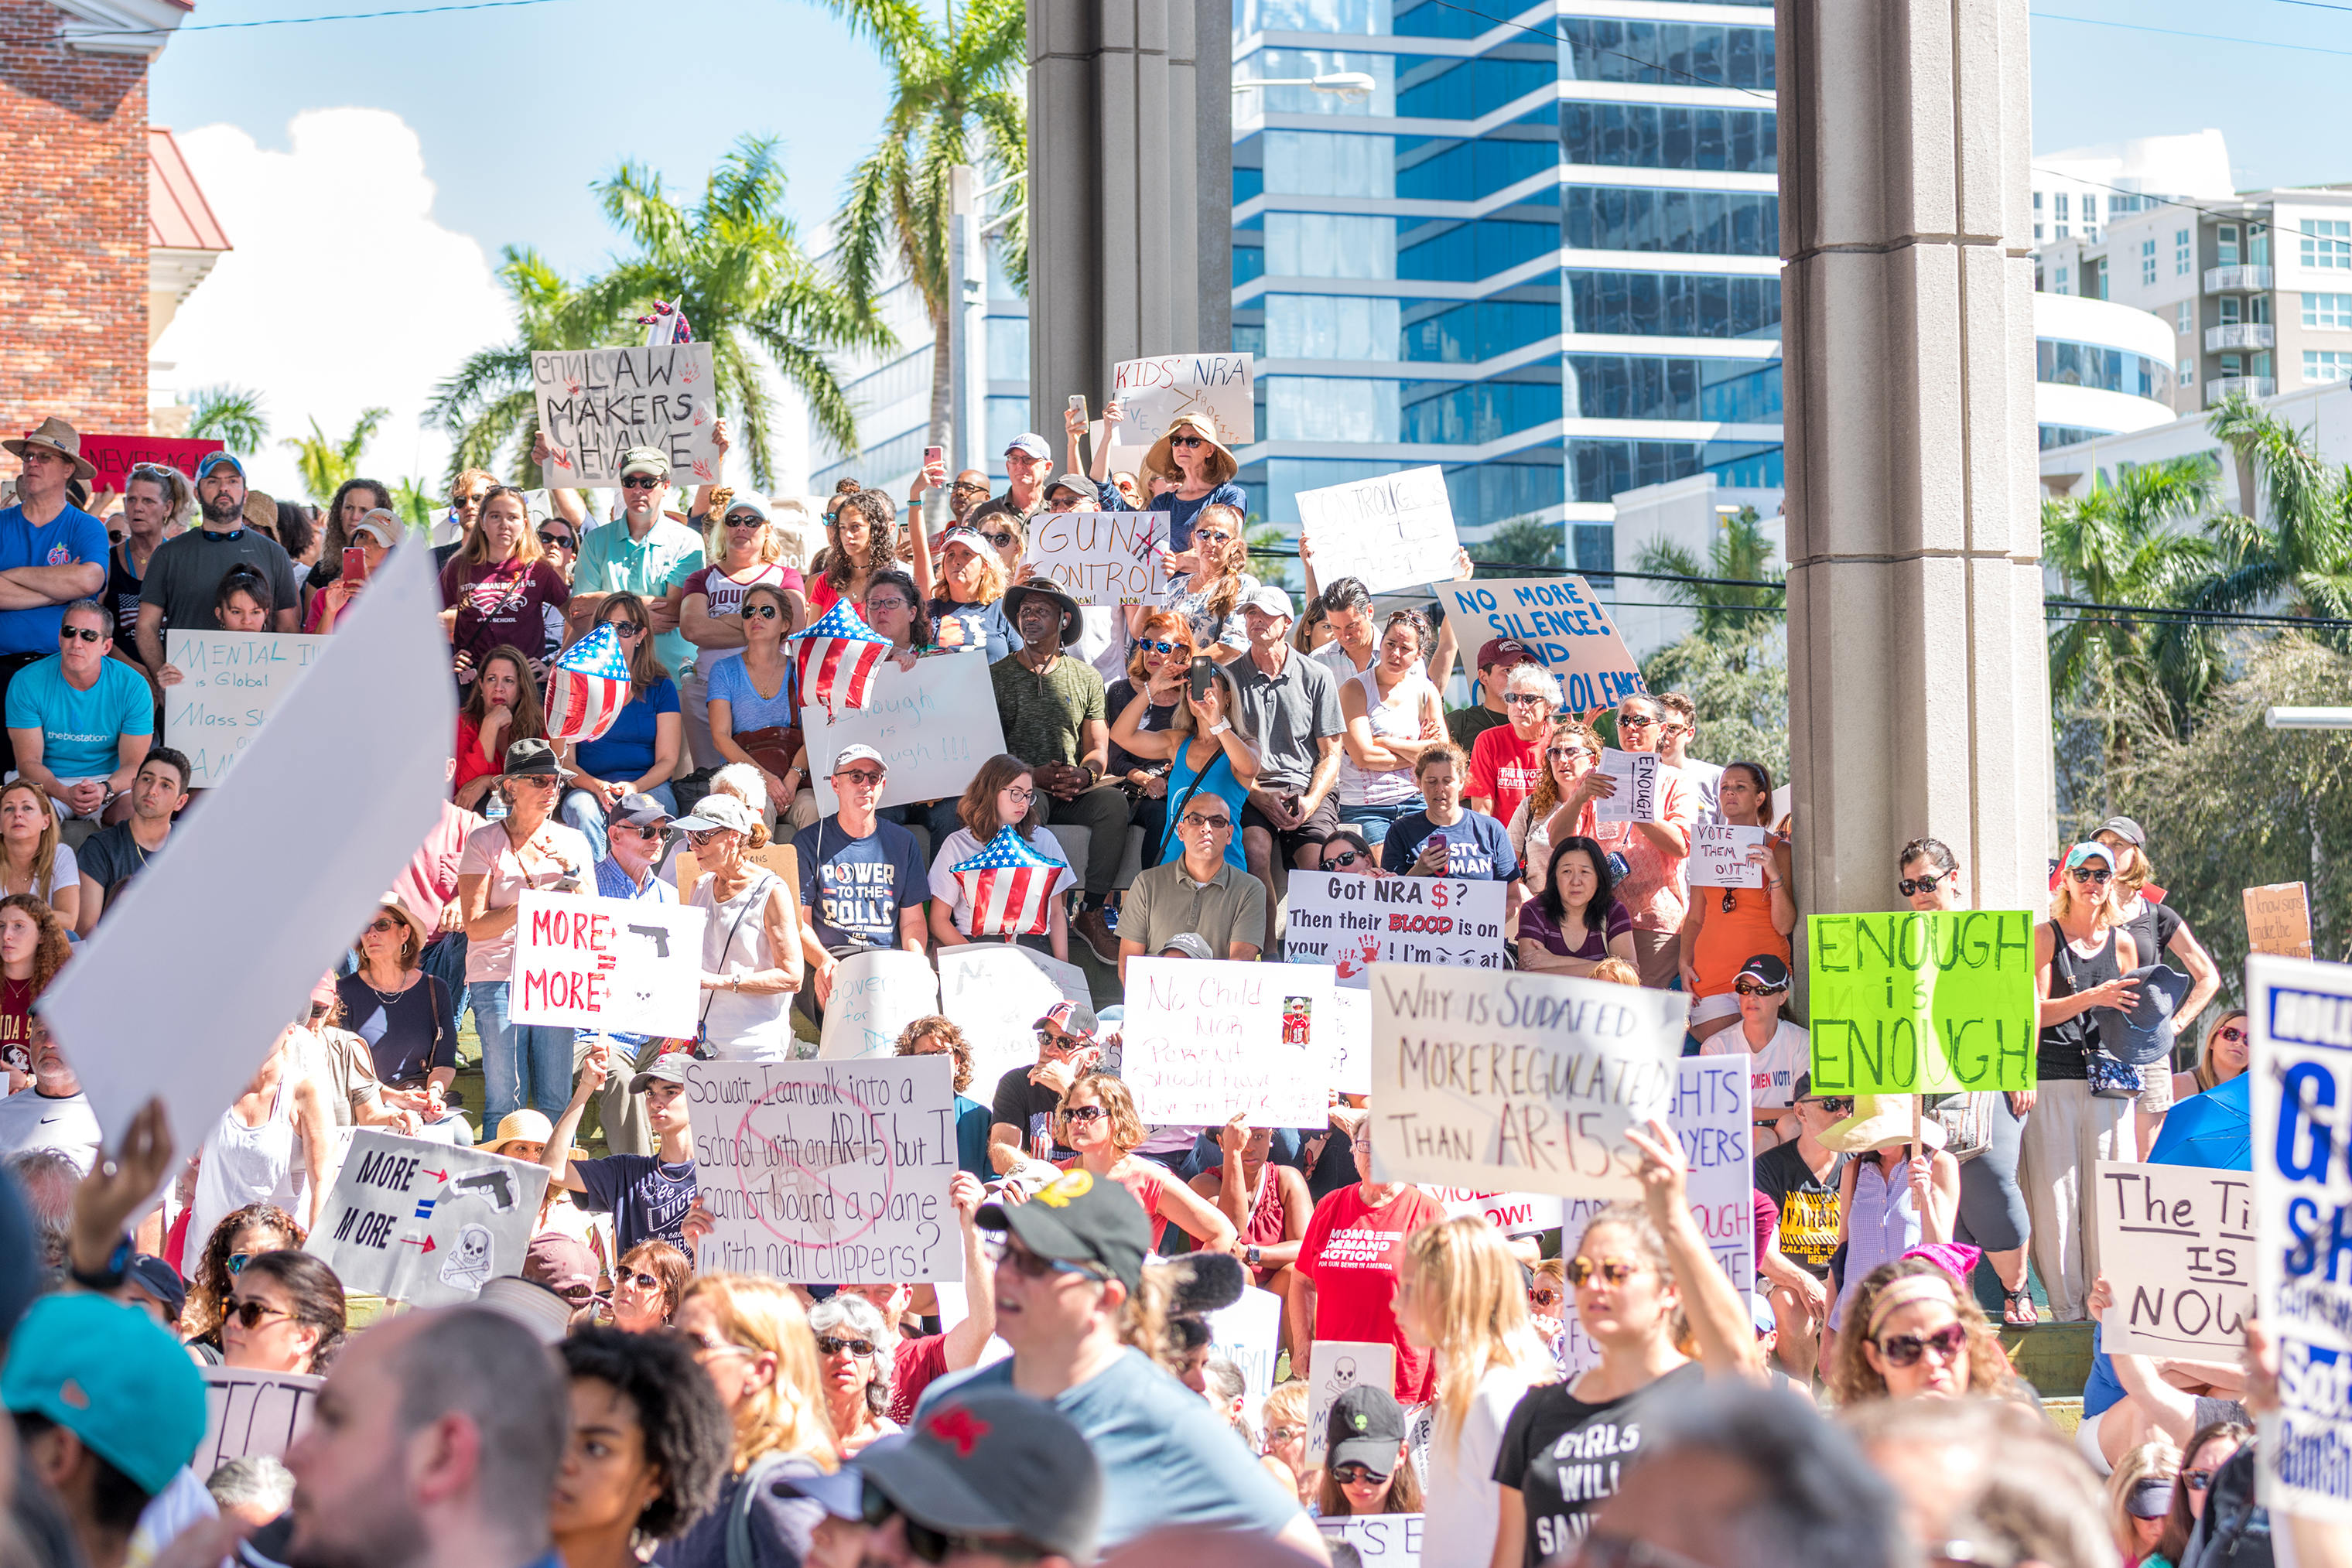 A Feb. 17 rally for gun control, held in Fort Lauderdale three days after the Parkland shooting, drew a crowd of thousands. (Suzanna Barna)